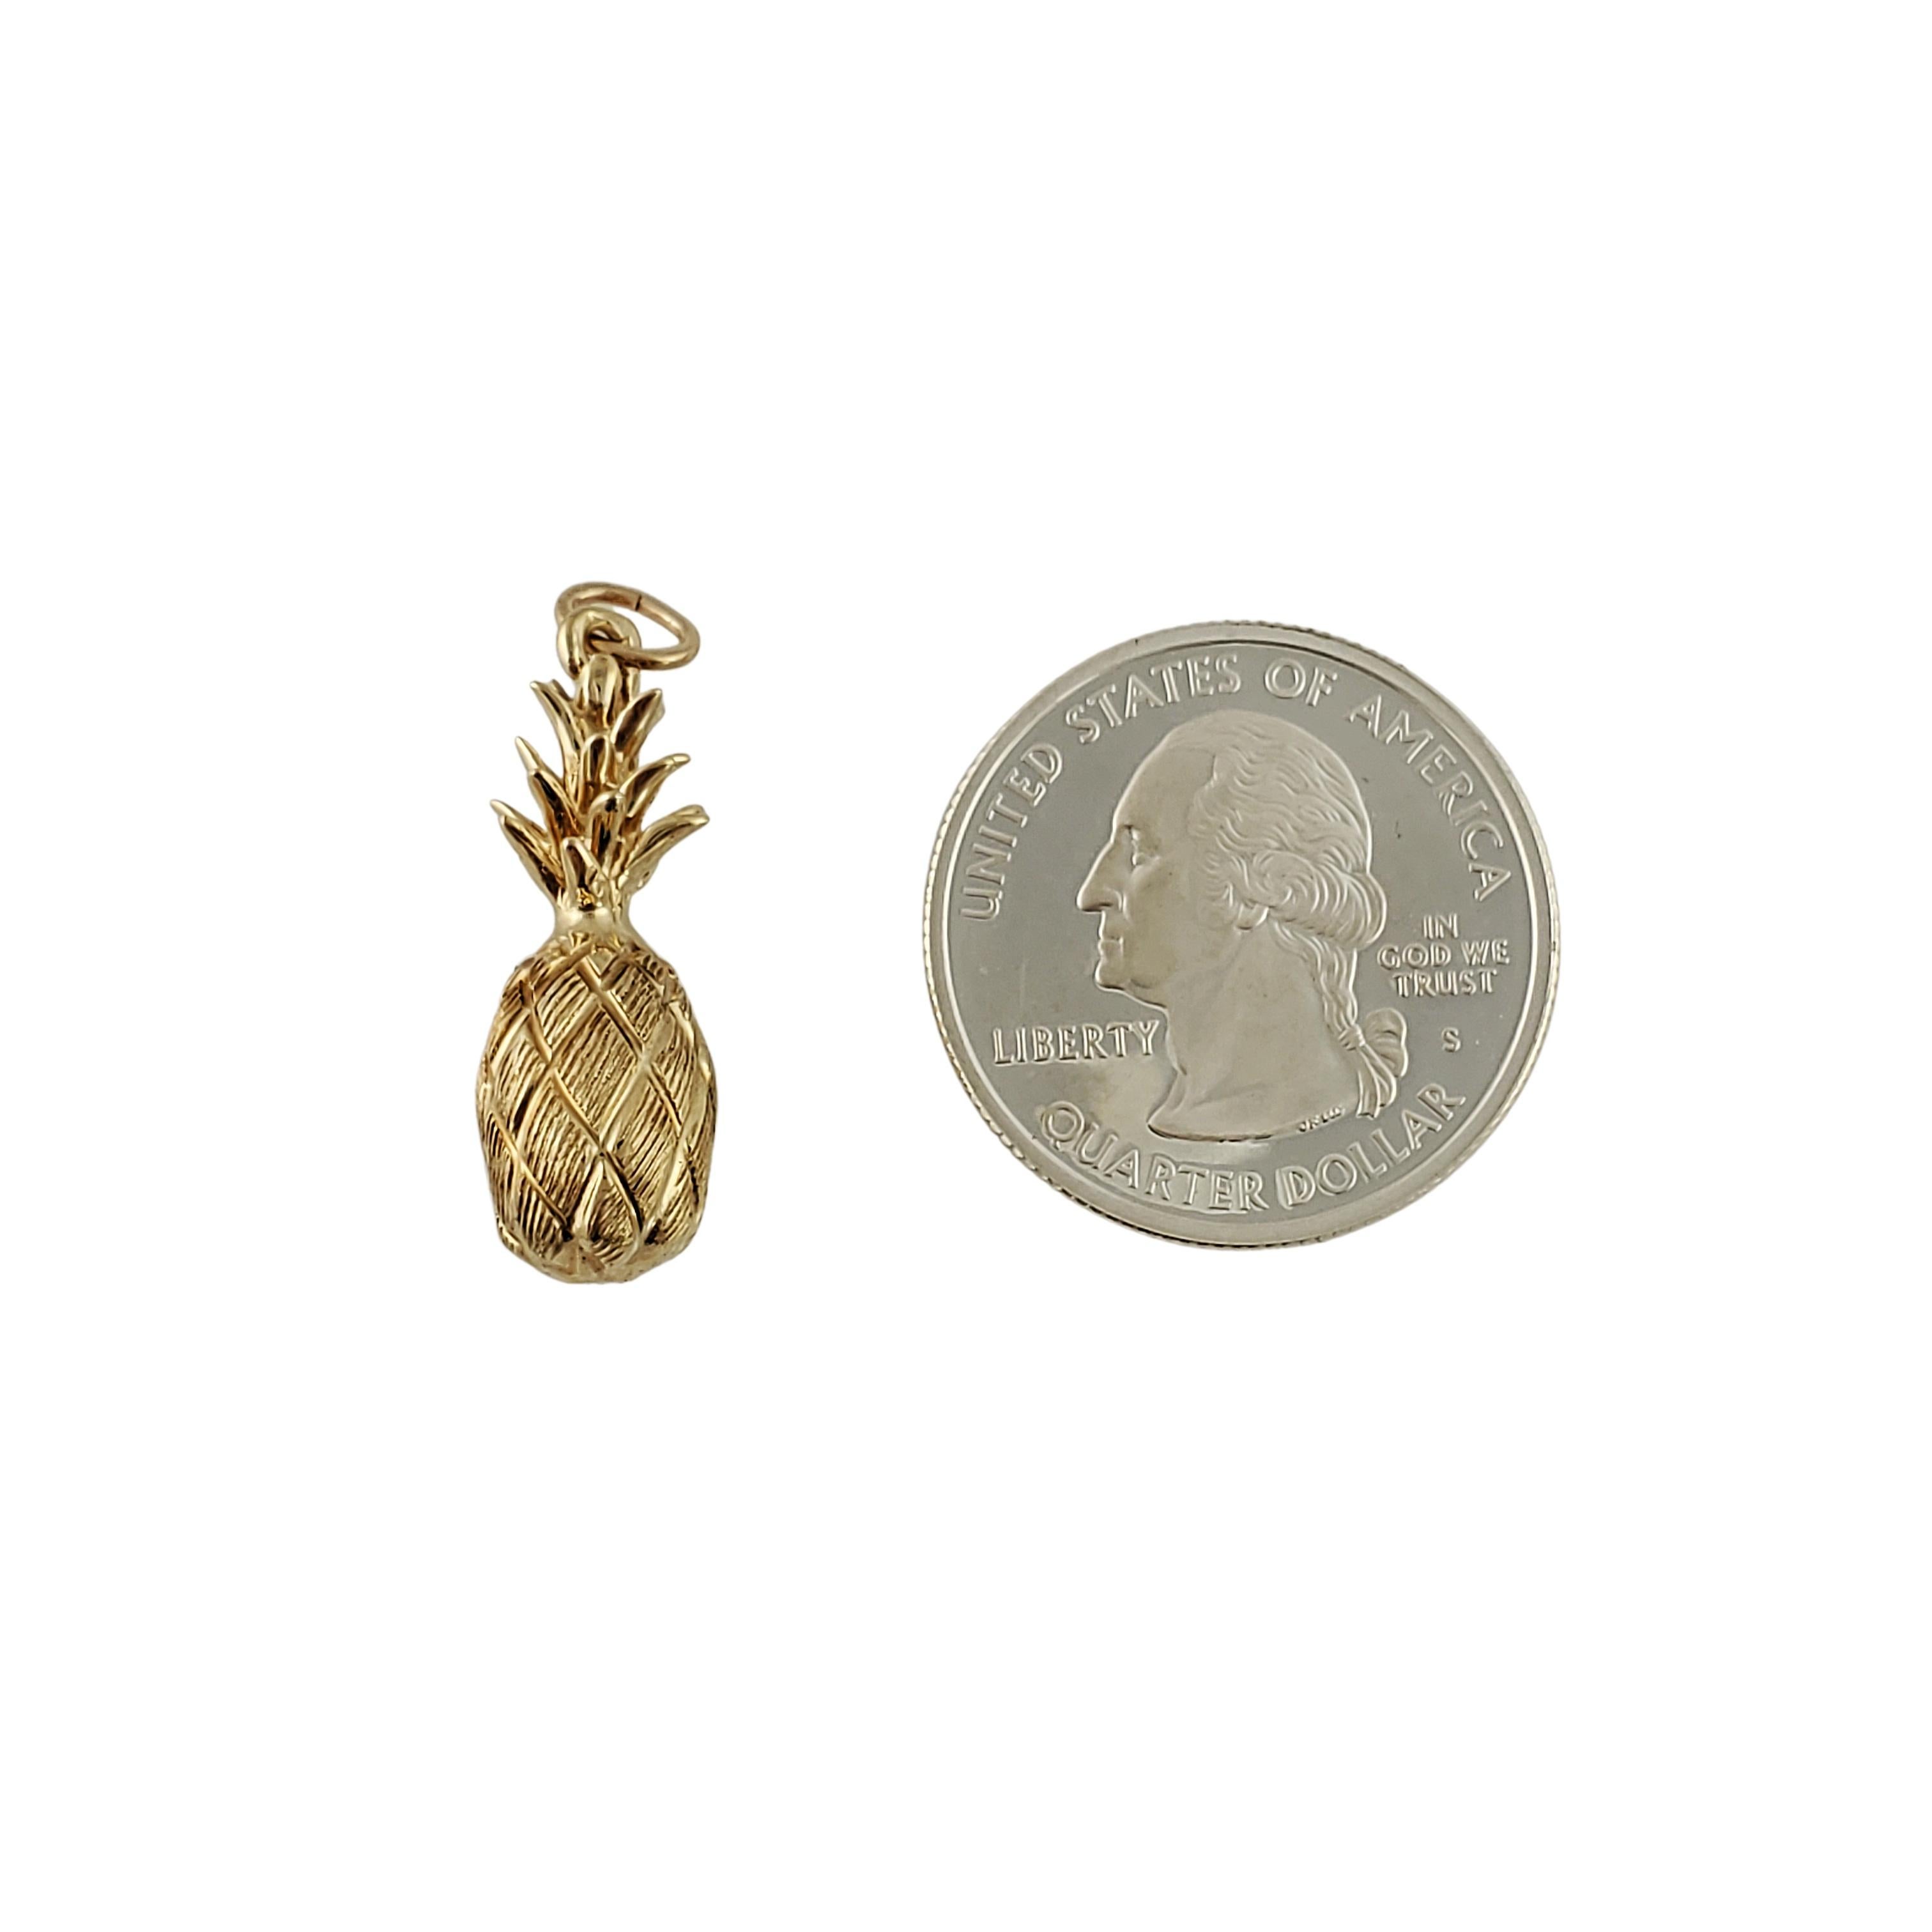 14 Karat Yellow Gold Pineapple Charm

This adorable piece features a pineapple, meticulously detailed in 14K gold. 

*Chain not included

Size: 25.2 mm x 9.9 mm (actual charm)

Weight: 2.3 dwt / 3.7 g.

Hallmark: 14K

Very good condition,